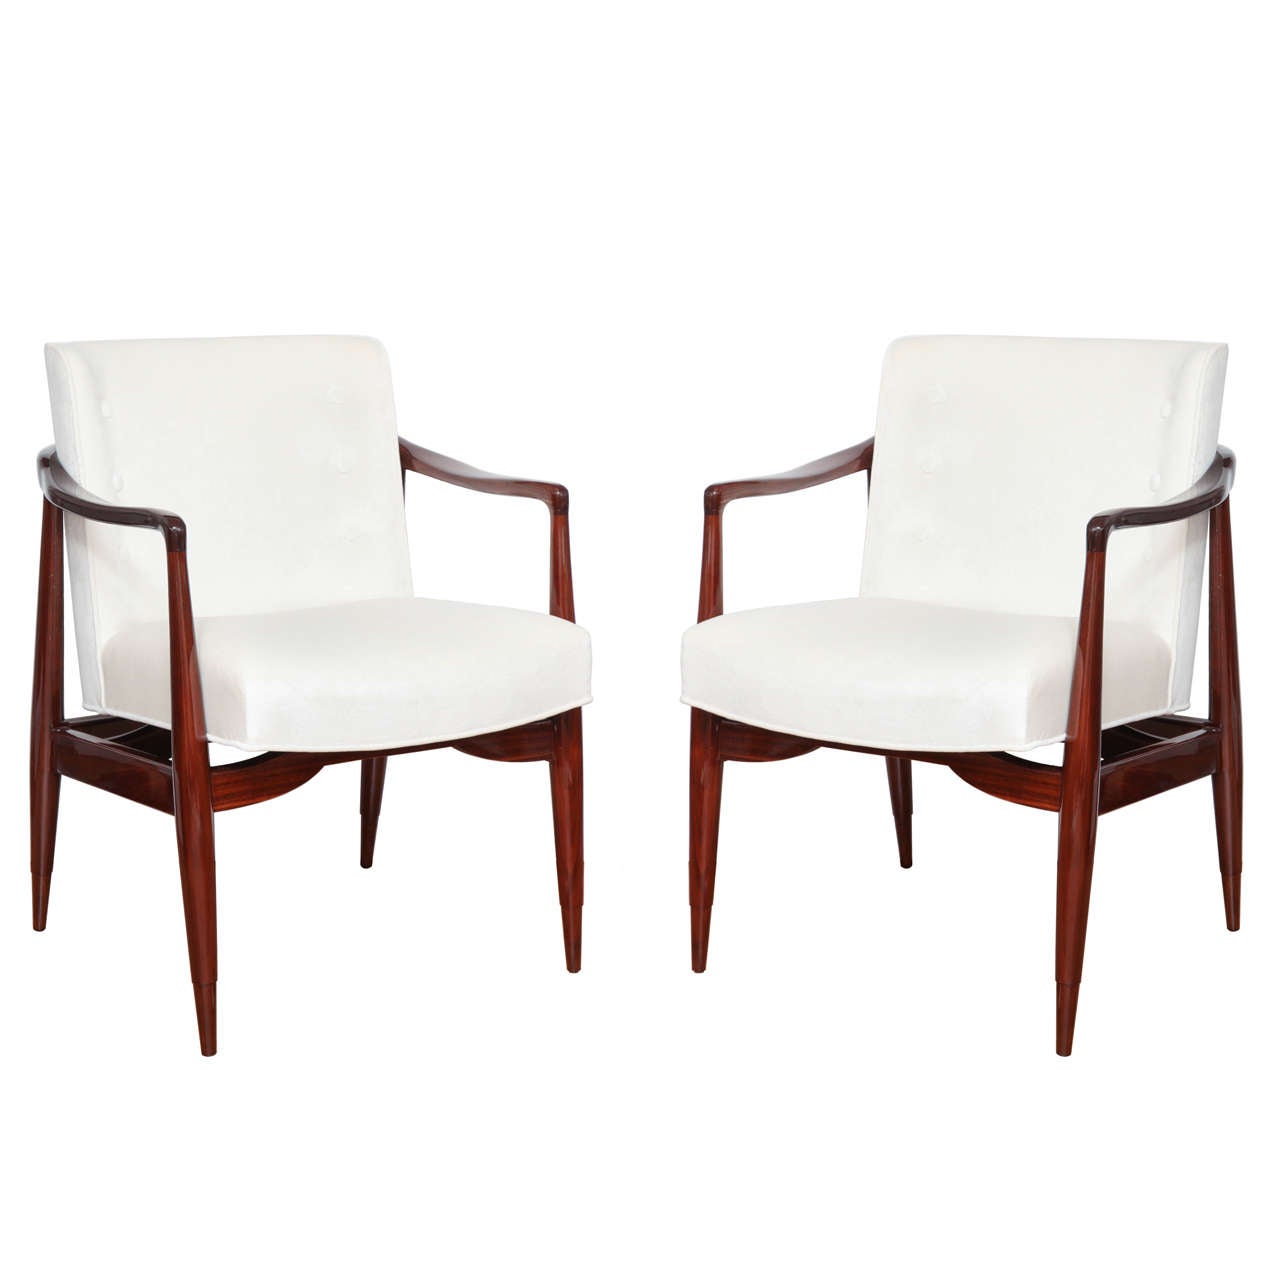 Sculptural American Midcentury Chairs For Sale